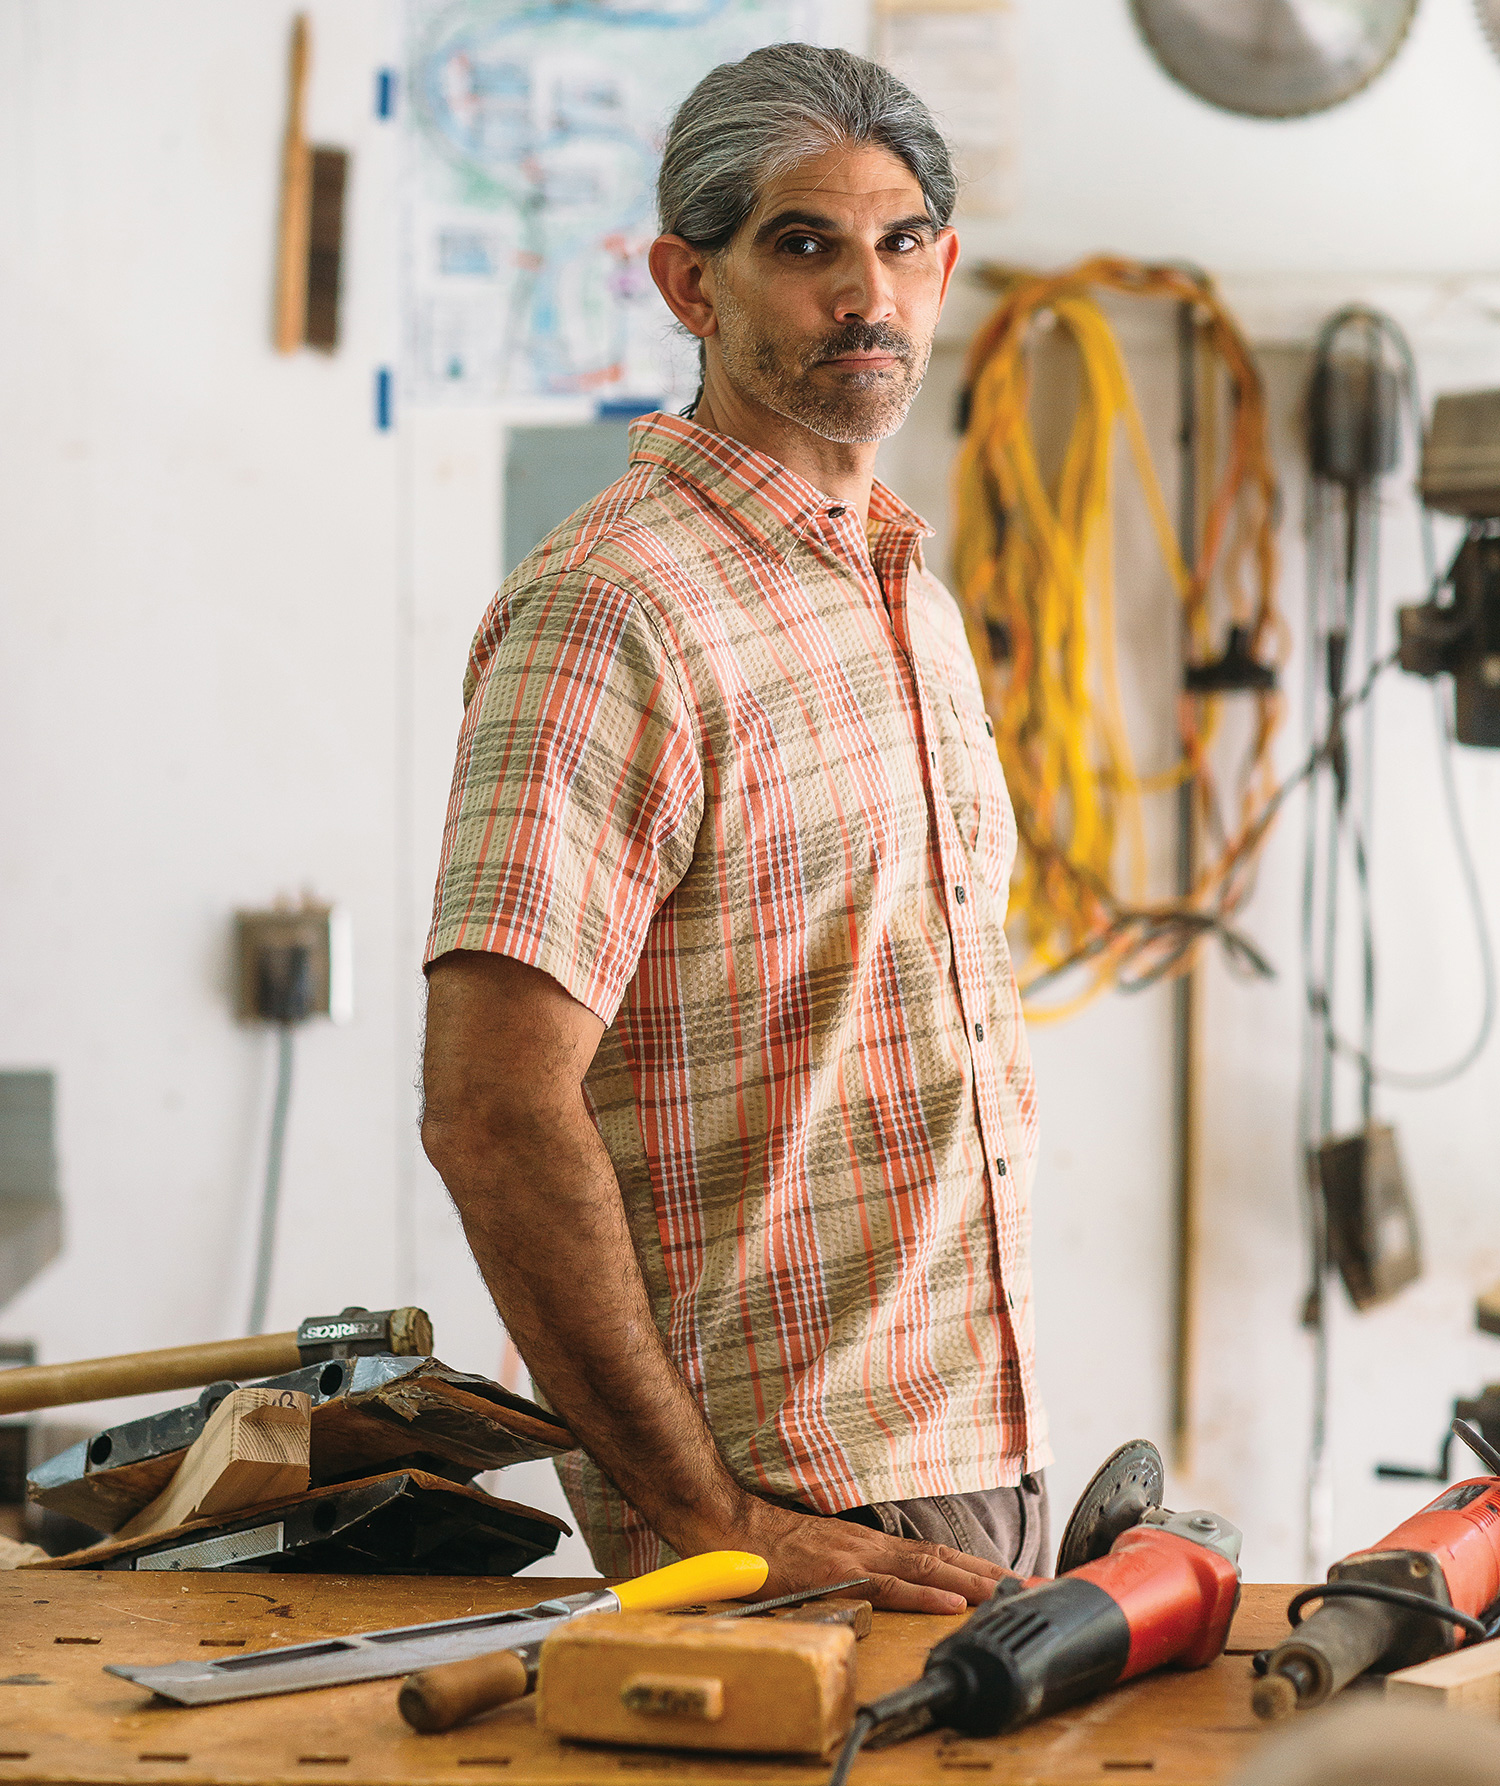 “I learned by doing,” says furniture maker Brian Fireman, whose pieces now fetch up to five digits. Photo by Tim Robison